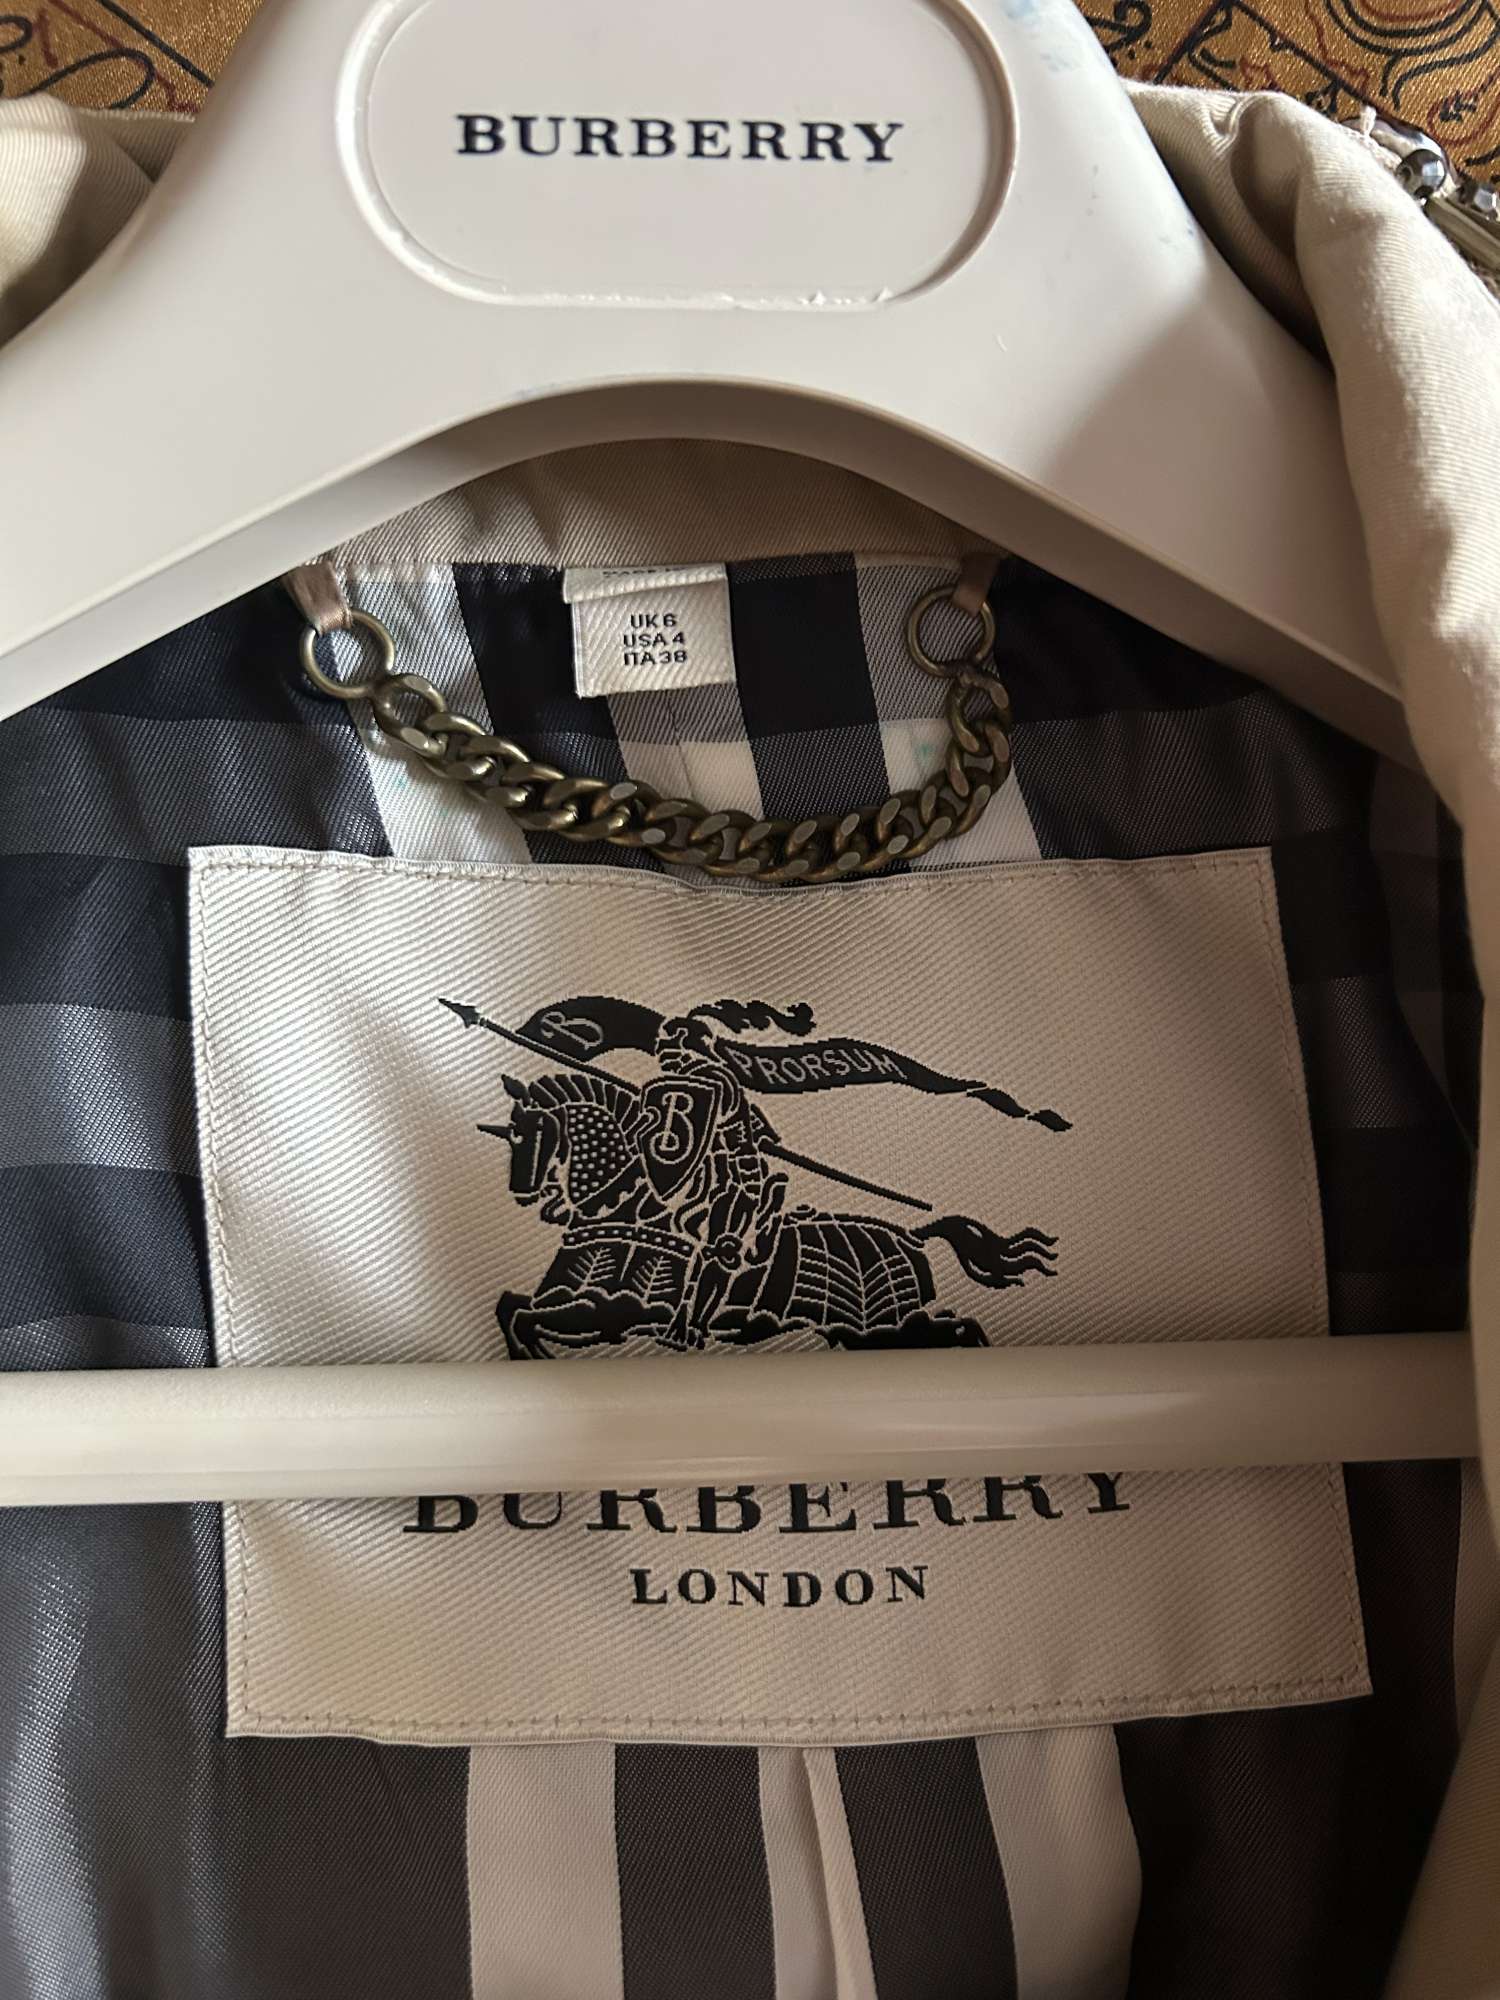 Burberry Trenchcoat with Stone Crystals